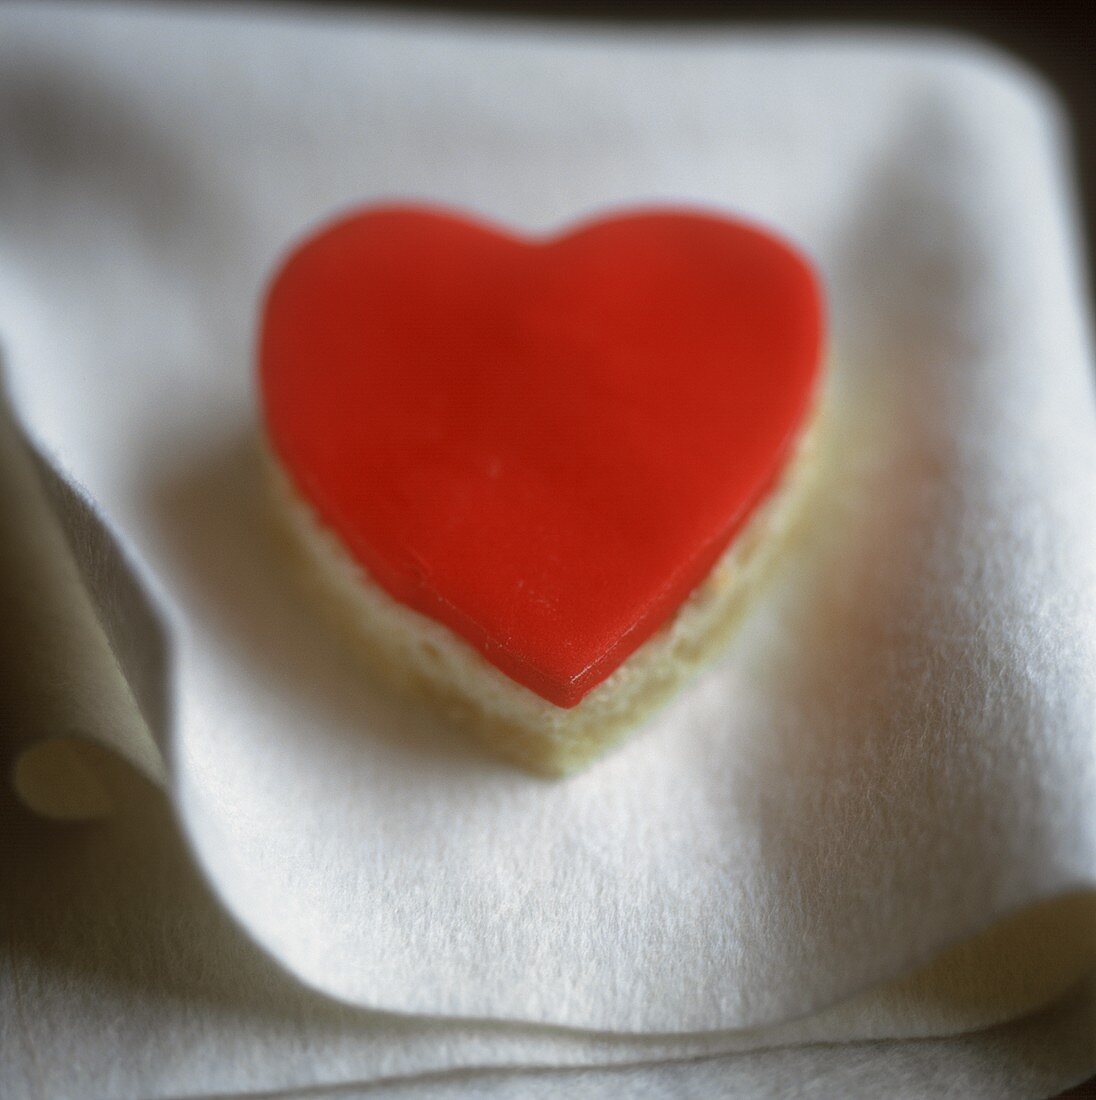 Heart-shaped sponge cake with red icing